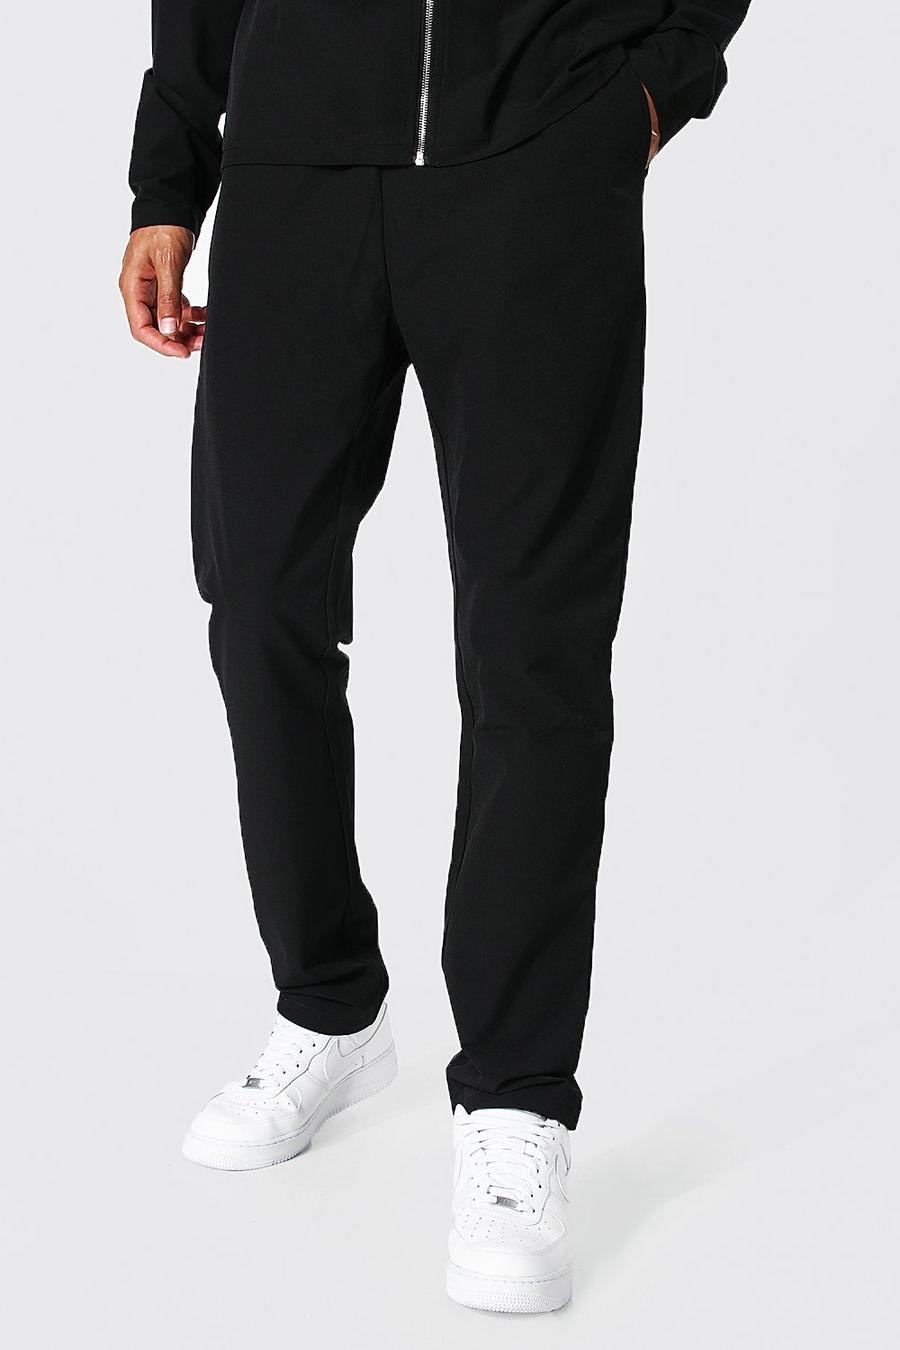 Black Tall Elasticated Waistband Tapered Trousers image number 1